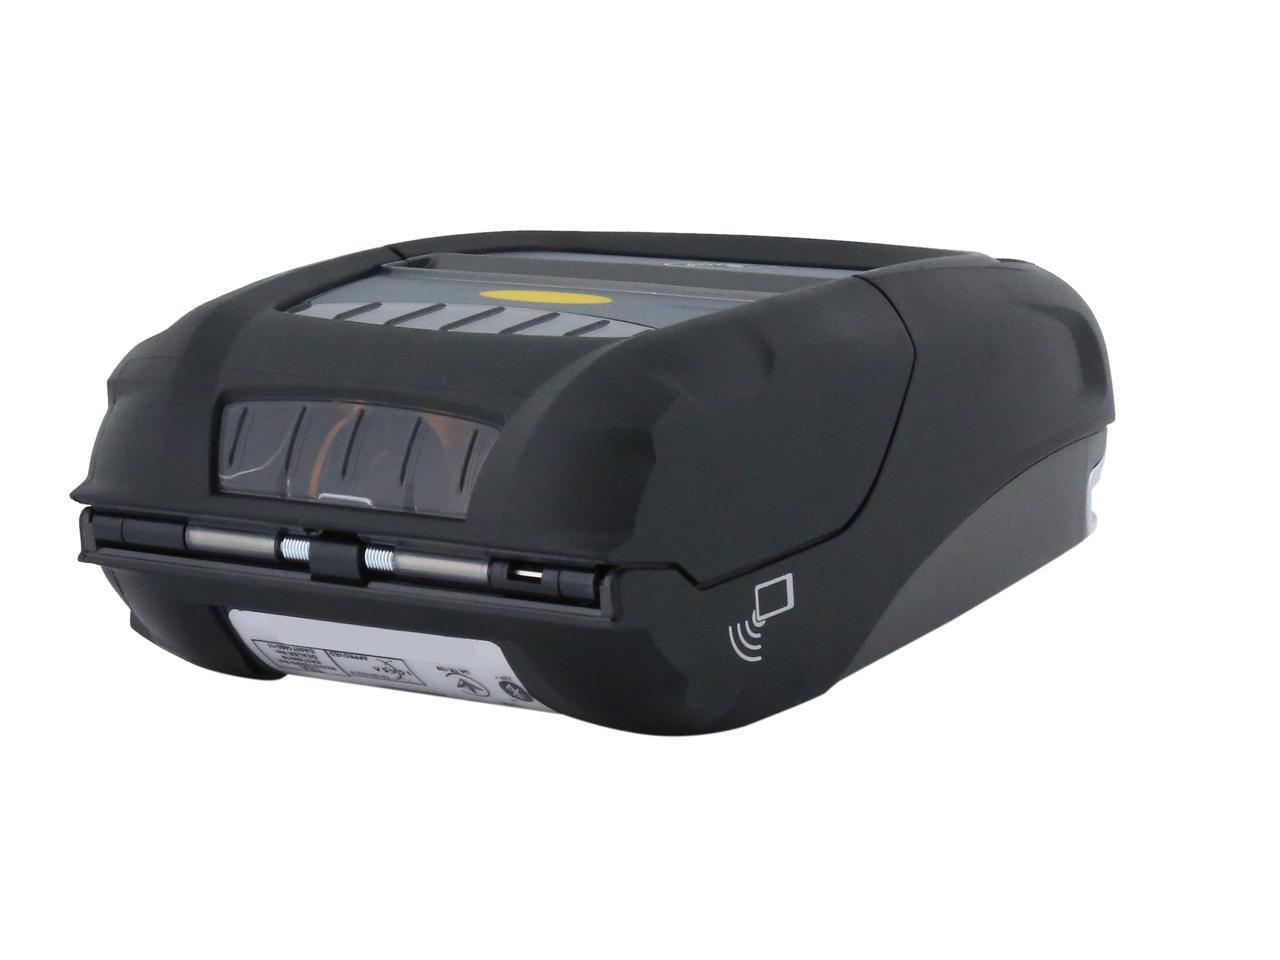 Zebra Zq510 3 Mobile Direct Thermal Receipt And Label Printer 203 Dpi Bluetooth 40 Linered 2956